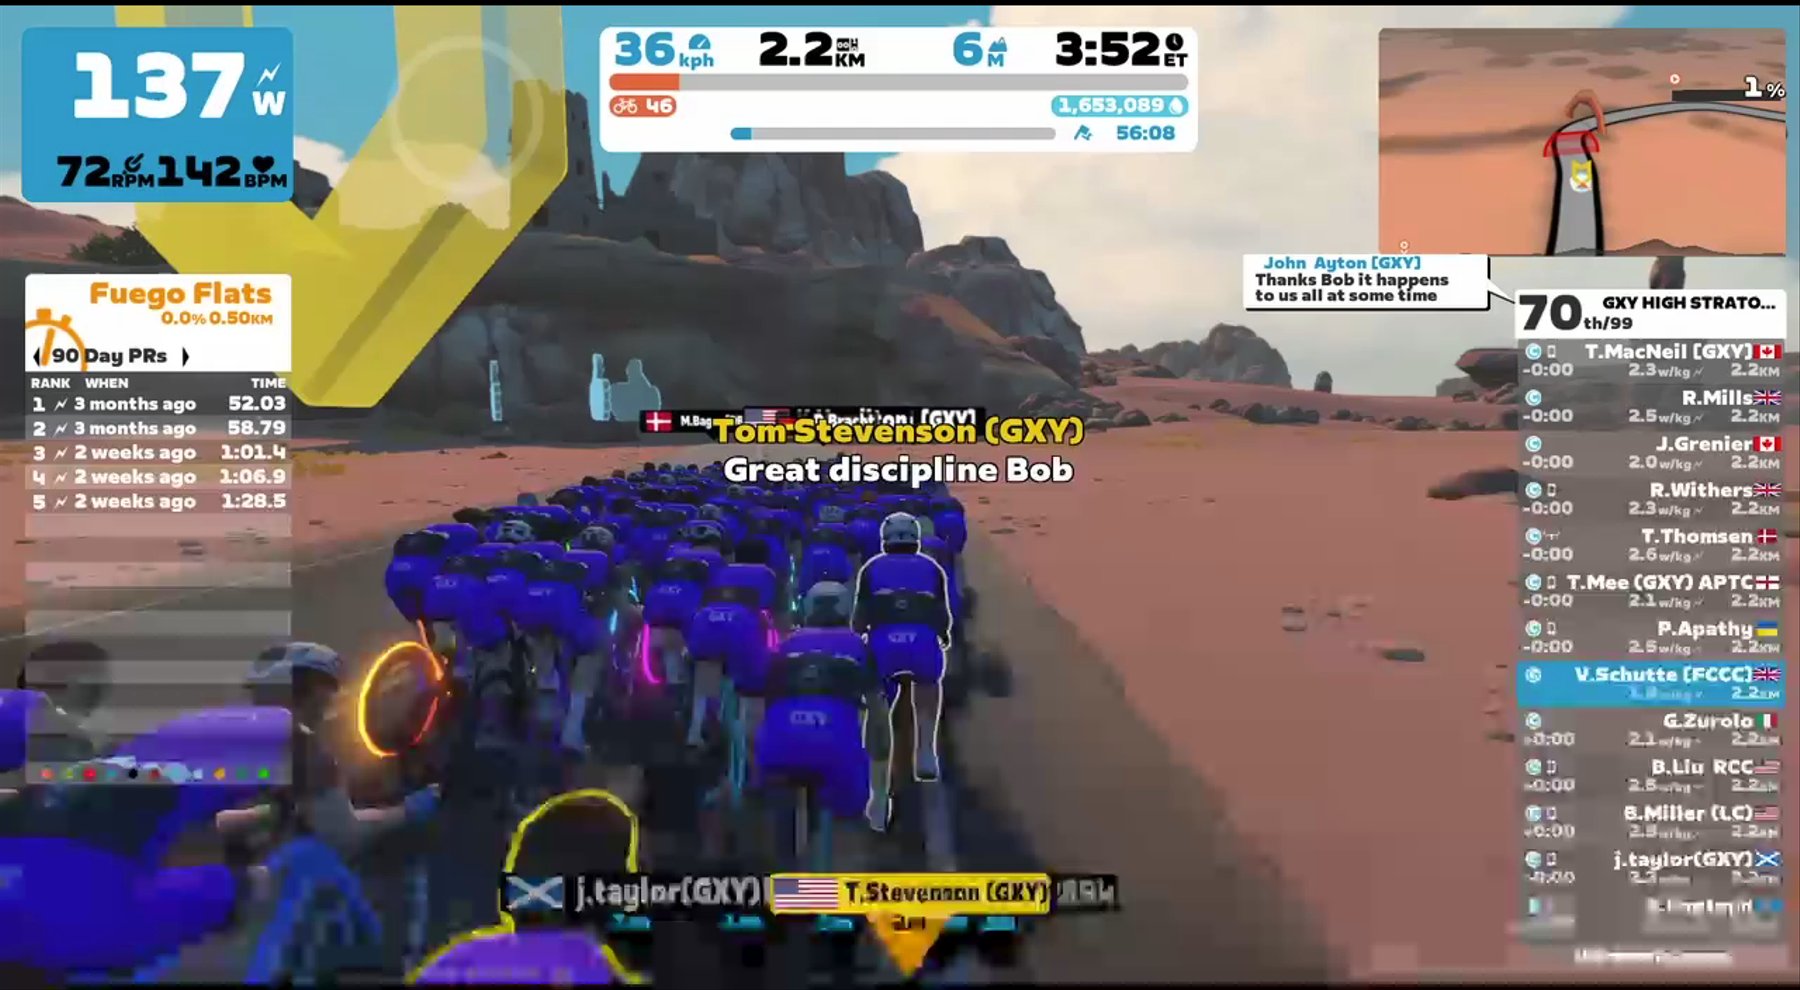 Zwift - Group Ride: GXY HIGH STRATOSPHERE [2.3-2.7wkg] – CAT C (C) on Triple Flat Loops in Watopia